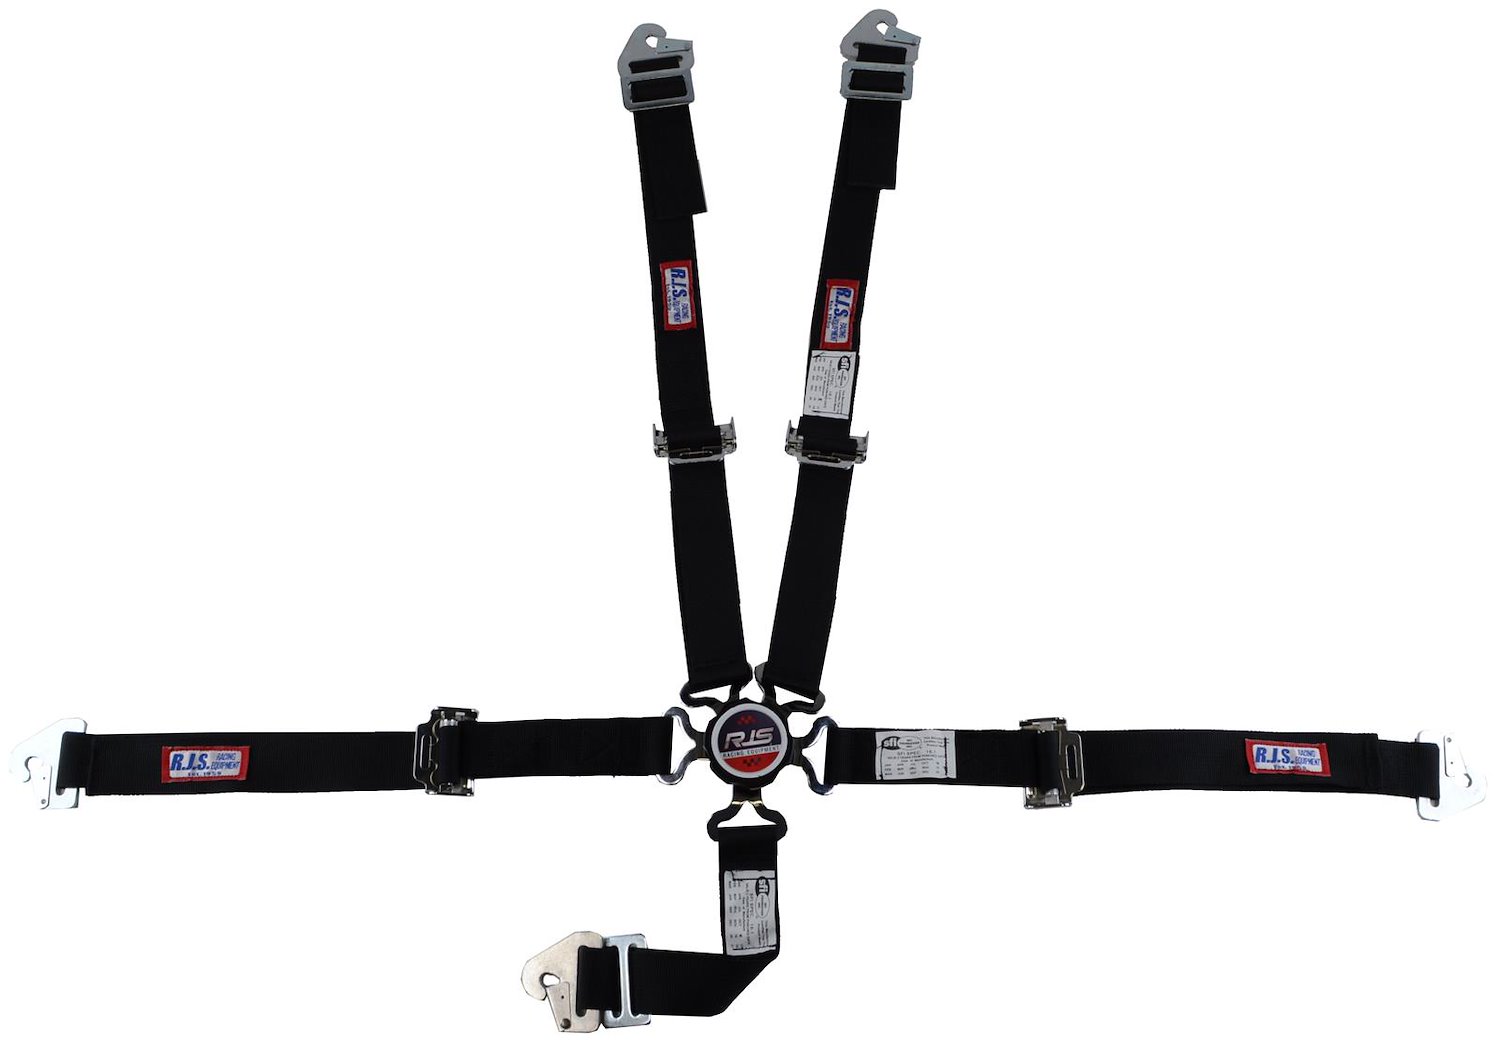 SFI 16.1 CAM-LOCK HARNESS 2 PULL UP Lap Belt 2 Shoulder Harness Individual ROLL BAR Mount 2 SINGLE Sub ALL WRAP ENDS GRAY